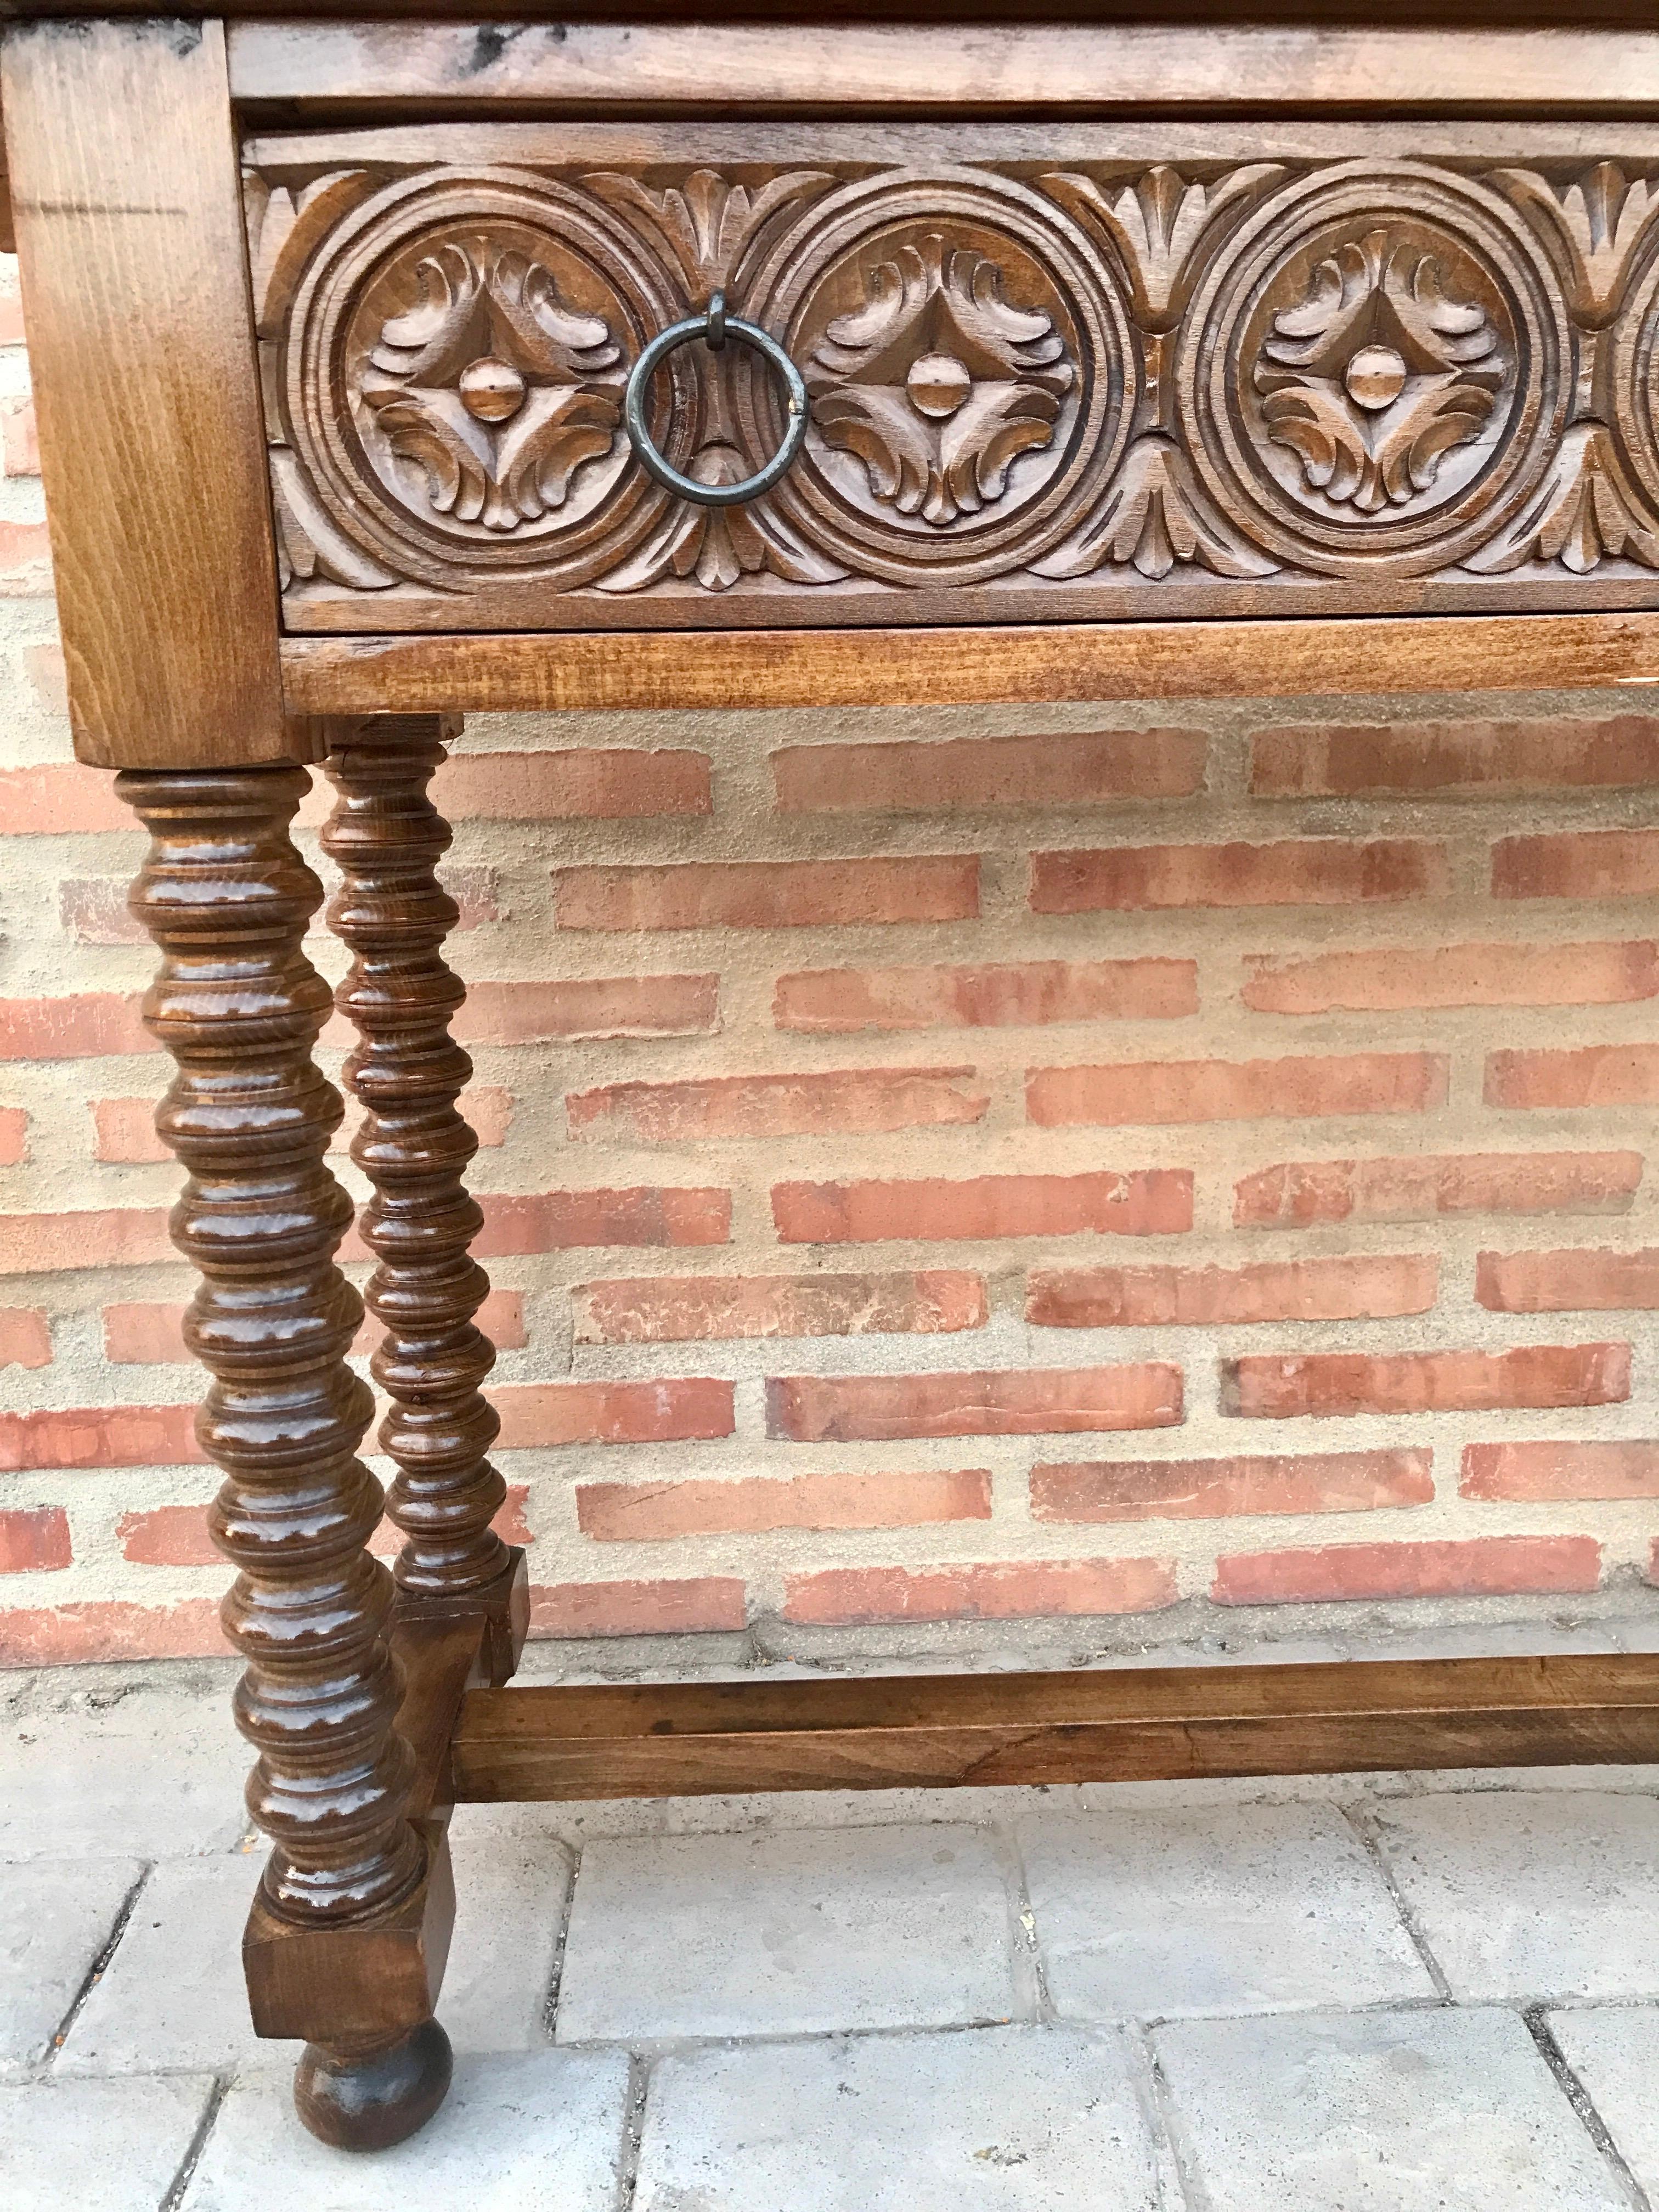 Early 20th Century Spanish Carved Console Table with Turned Legs 1